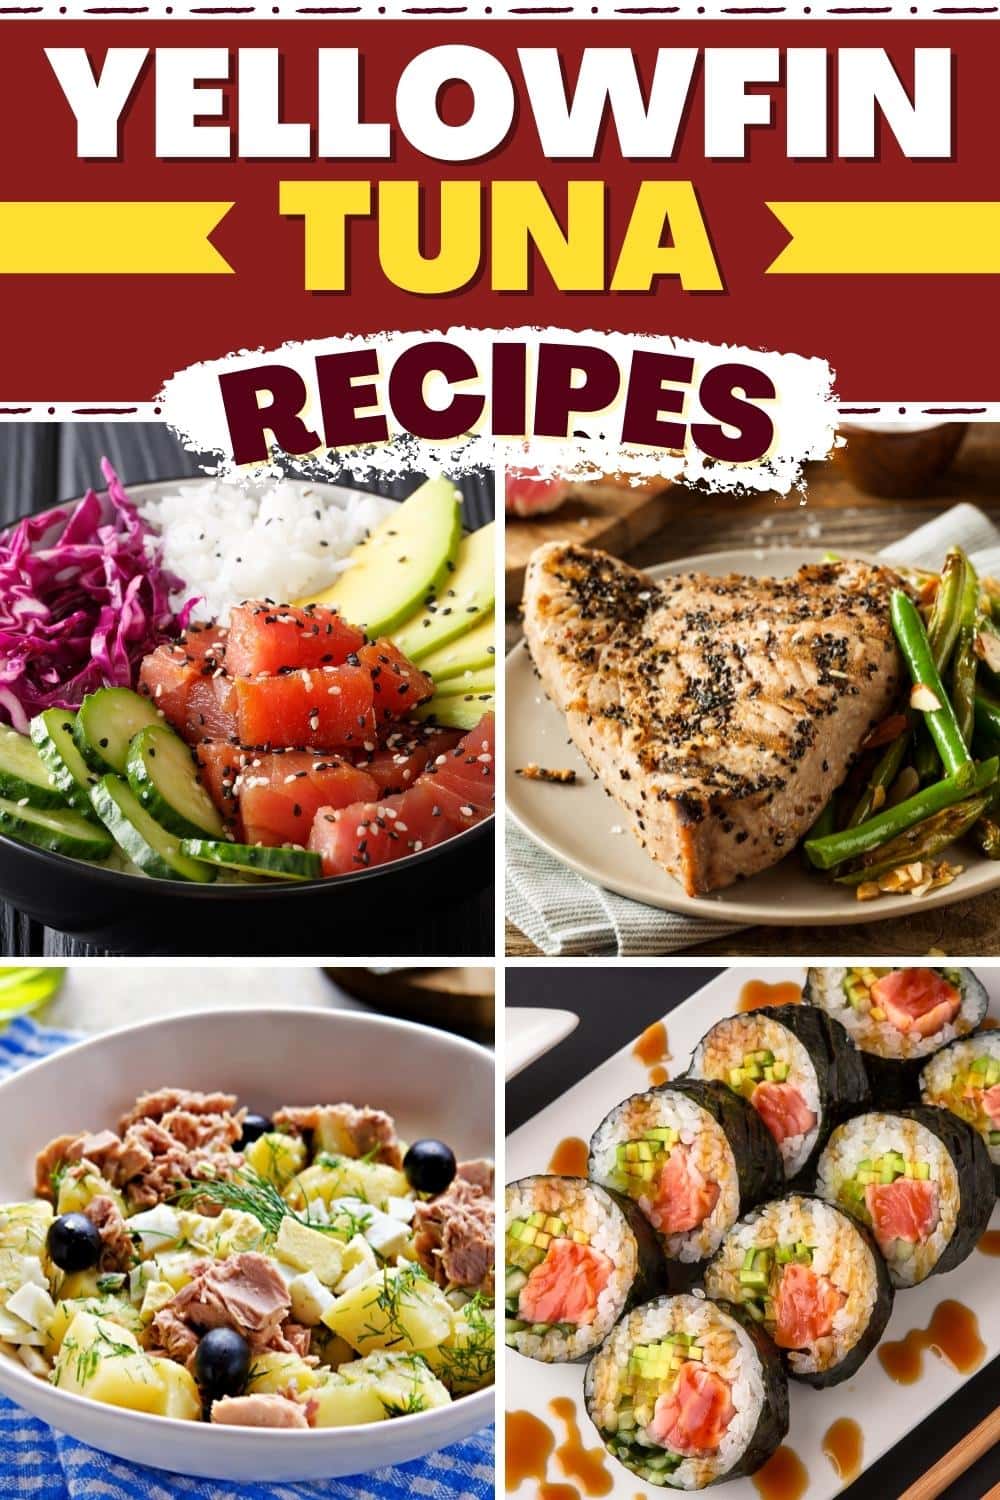 10-best-yellowfin-tuna-recipes-to-make-for-dinner-insanely-good